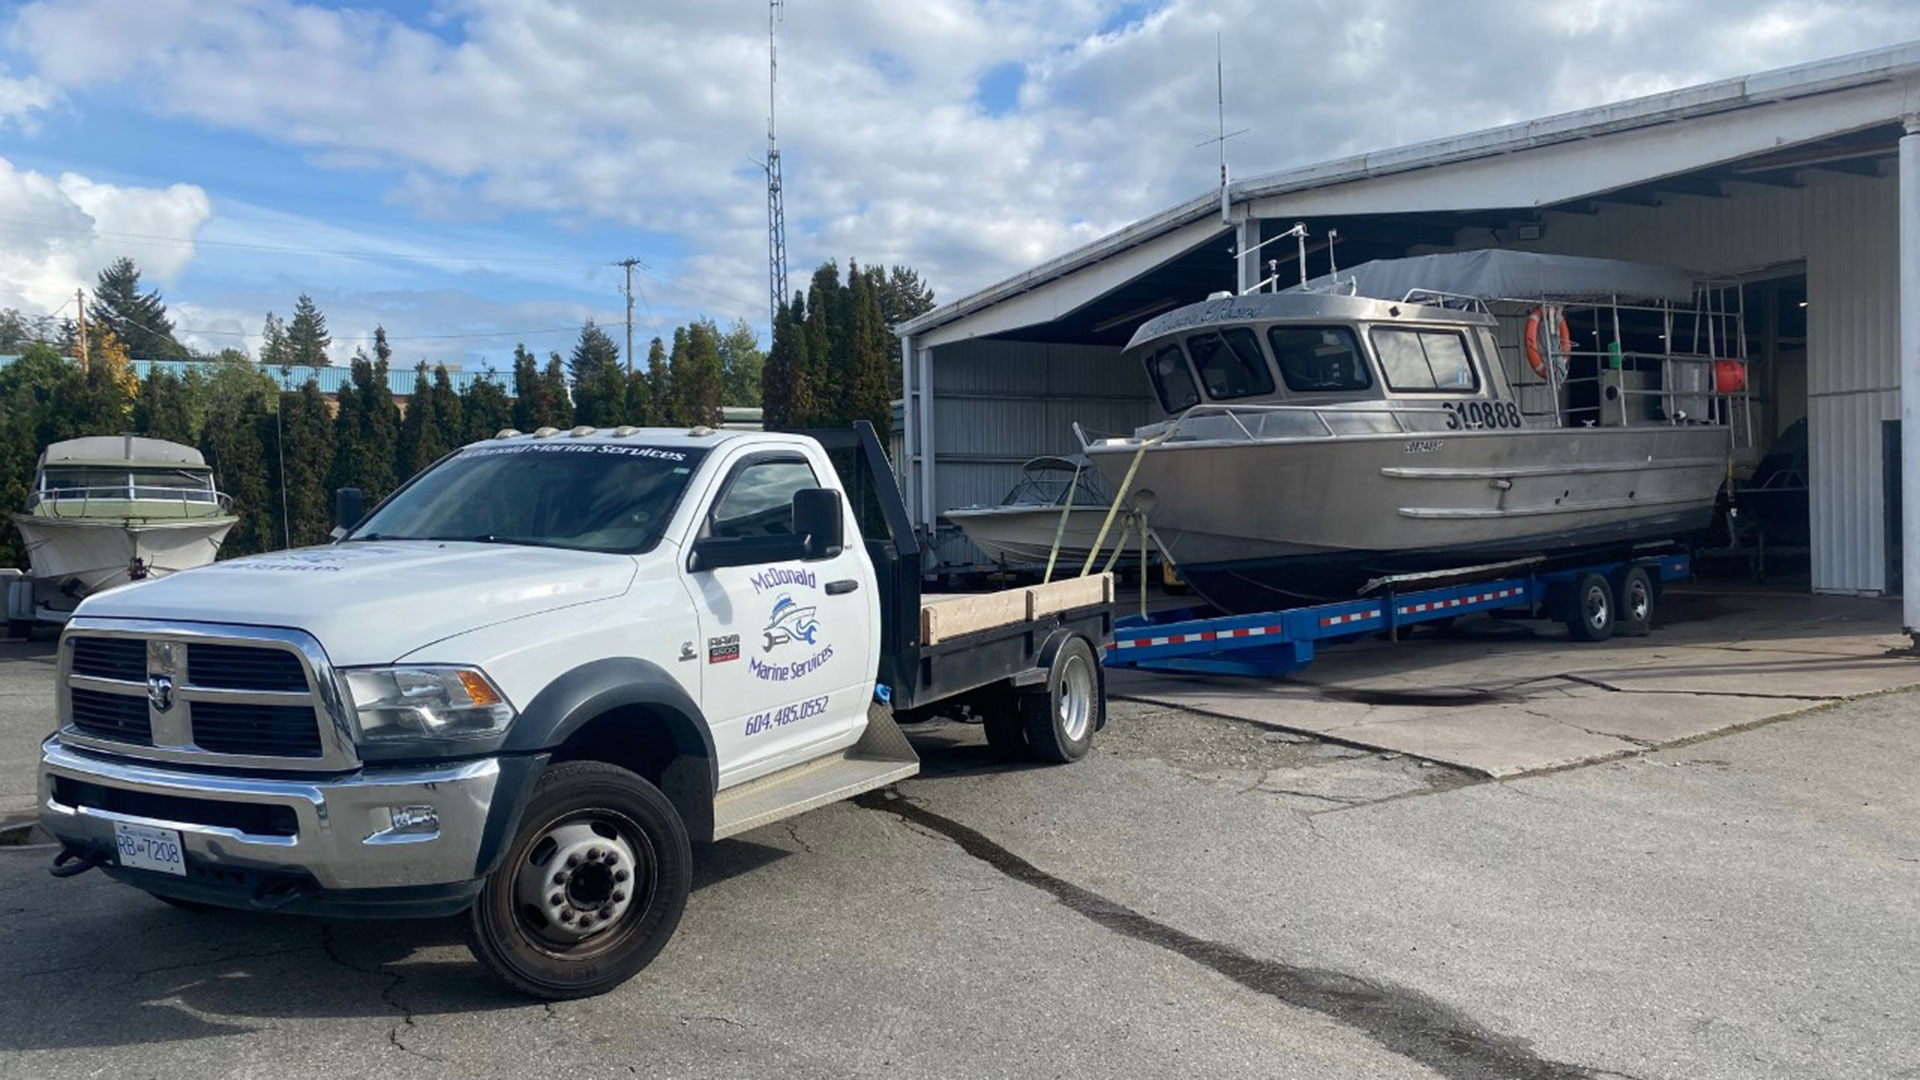 McDonald Marine offers haul out services unto 32 feet